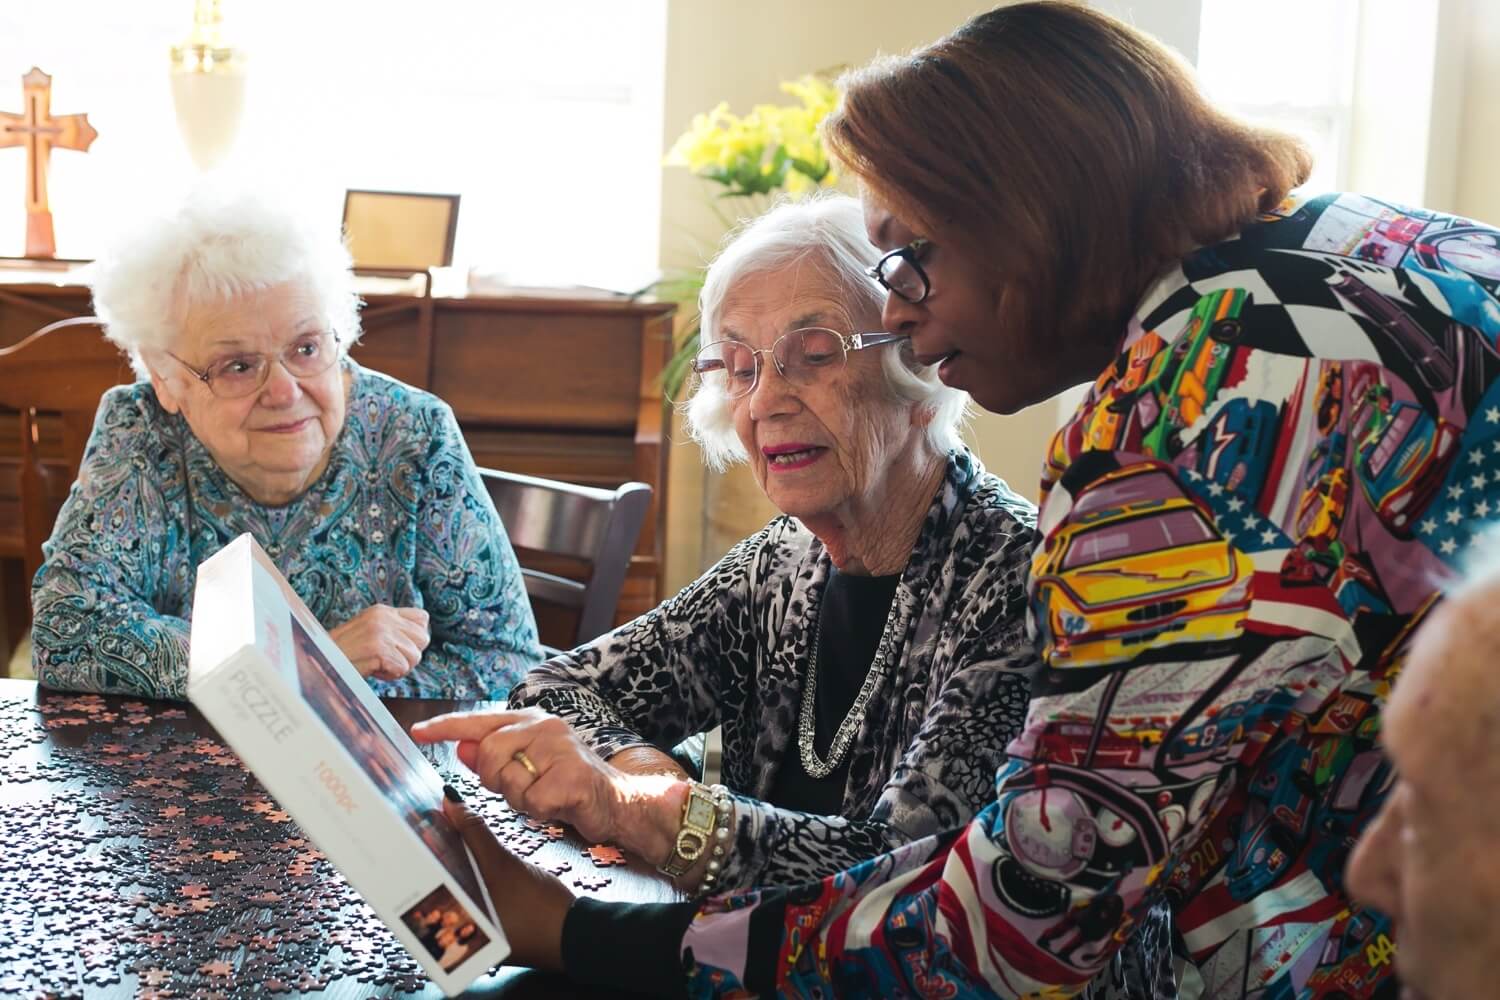 Team member helping a senior woman with a jigsaw puzzle